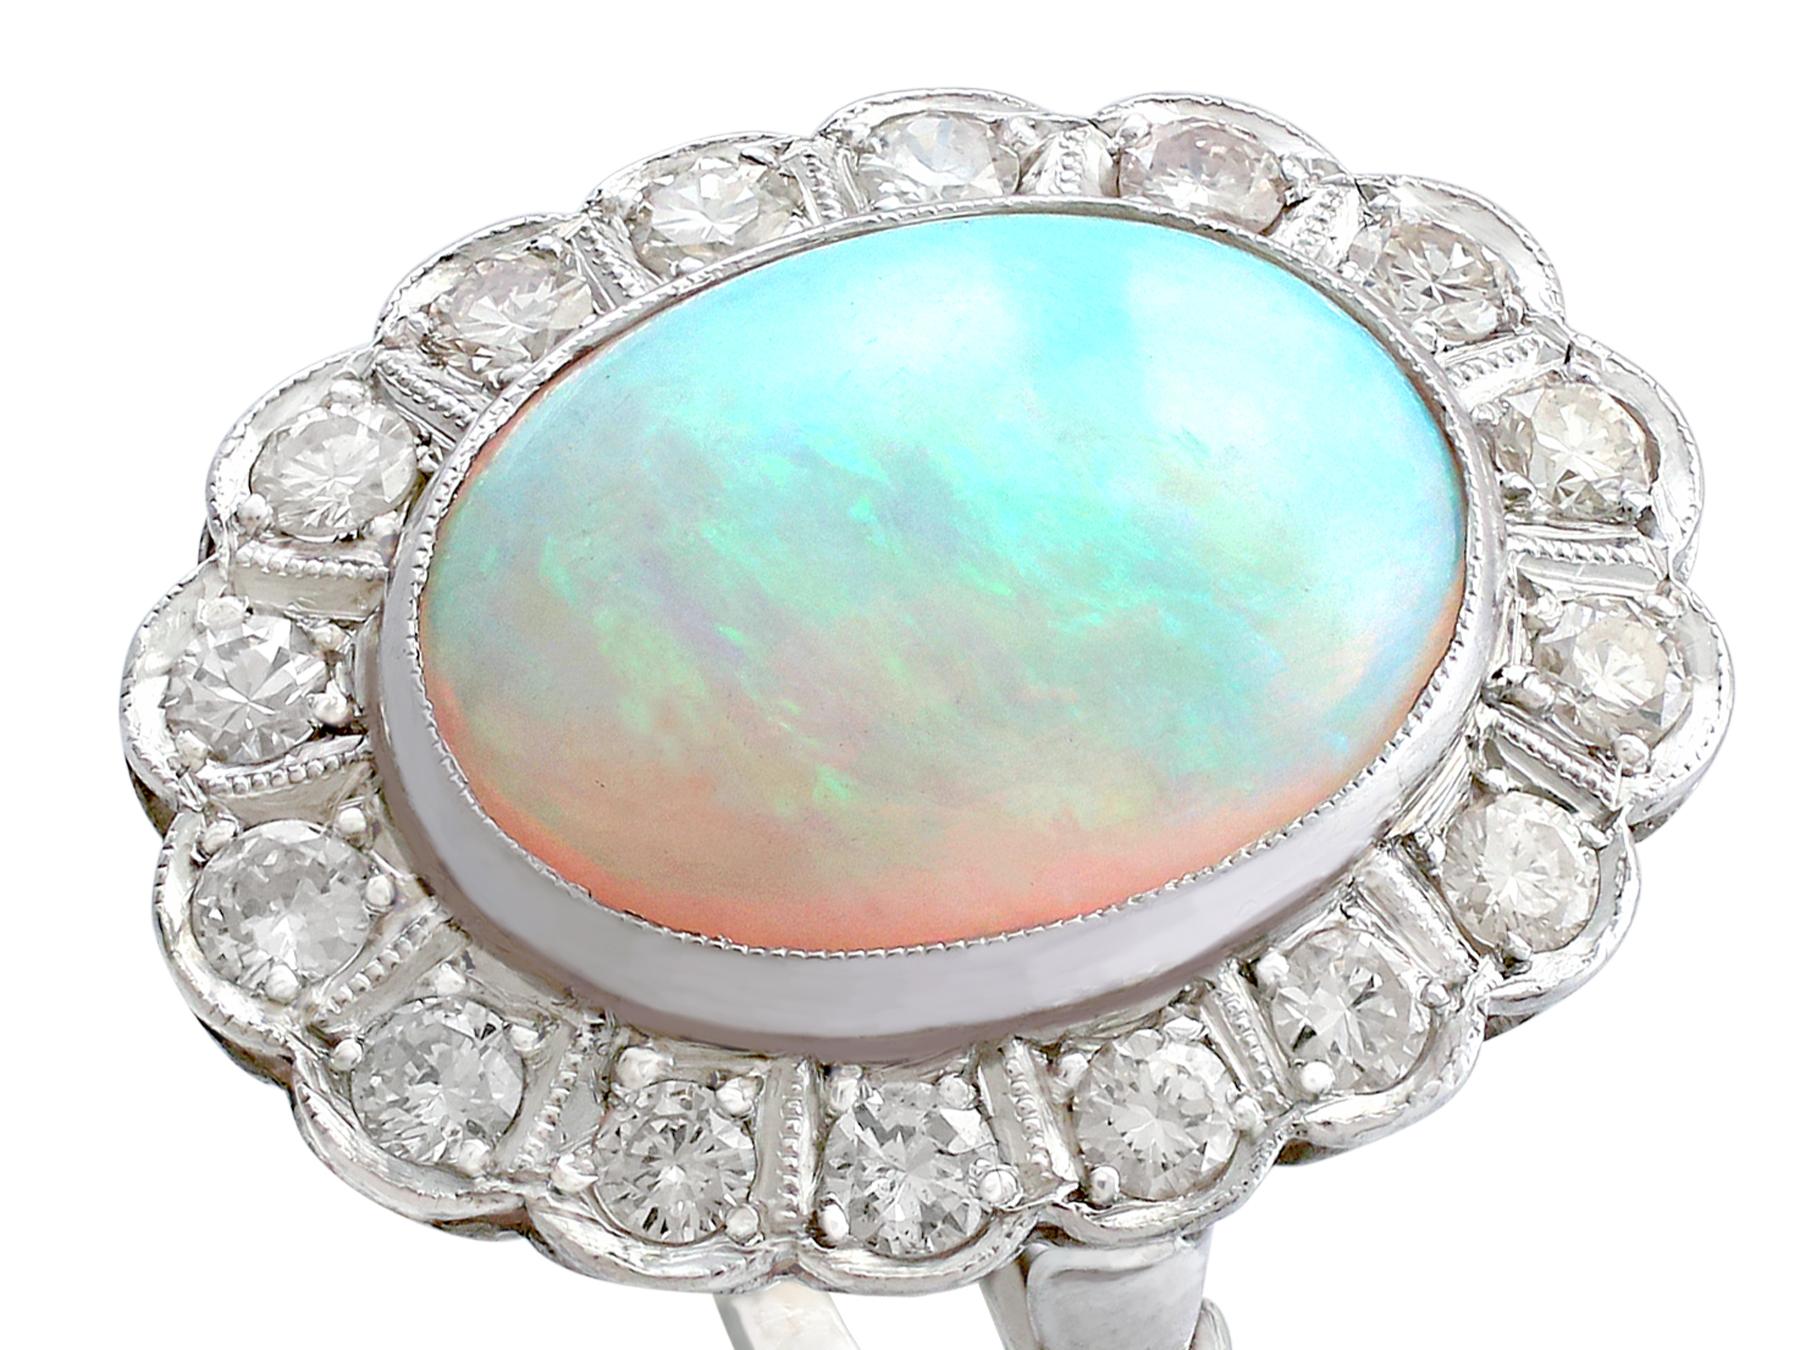 A stunning antique 6.02 carat opal and 1.48 carat diamond, platinum cluster style dress ring; part of our diverse antique jewelry and estate jewelry collections.

This stunning, fine and impressive antique opal ring has been crafted in